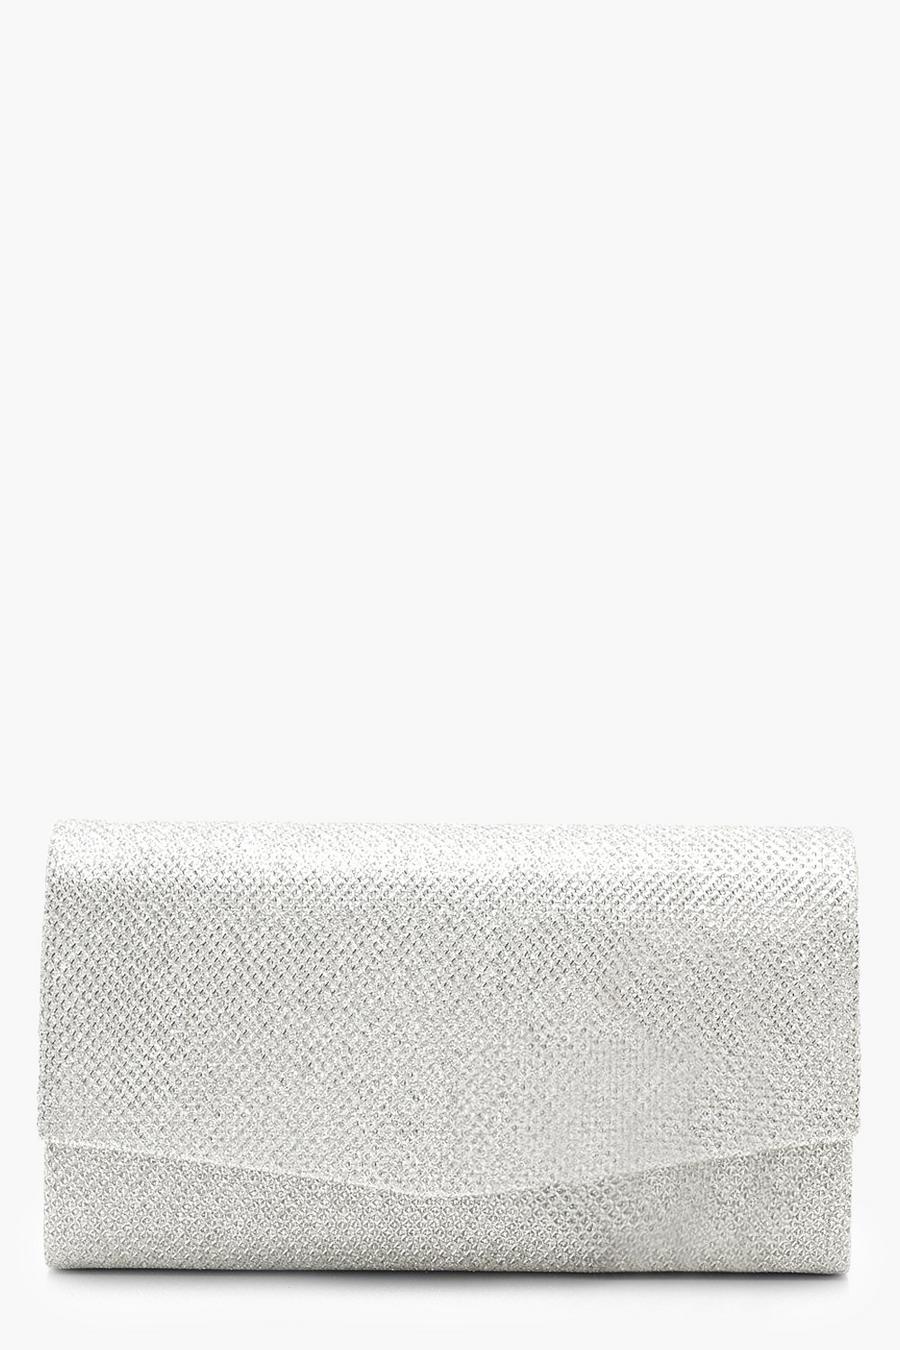 Silver Evening Bags